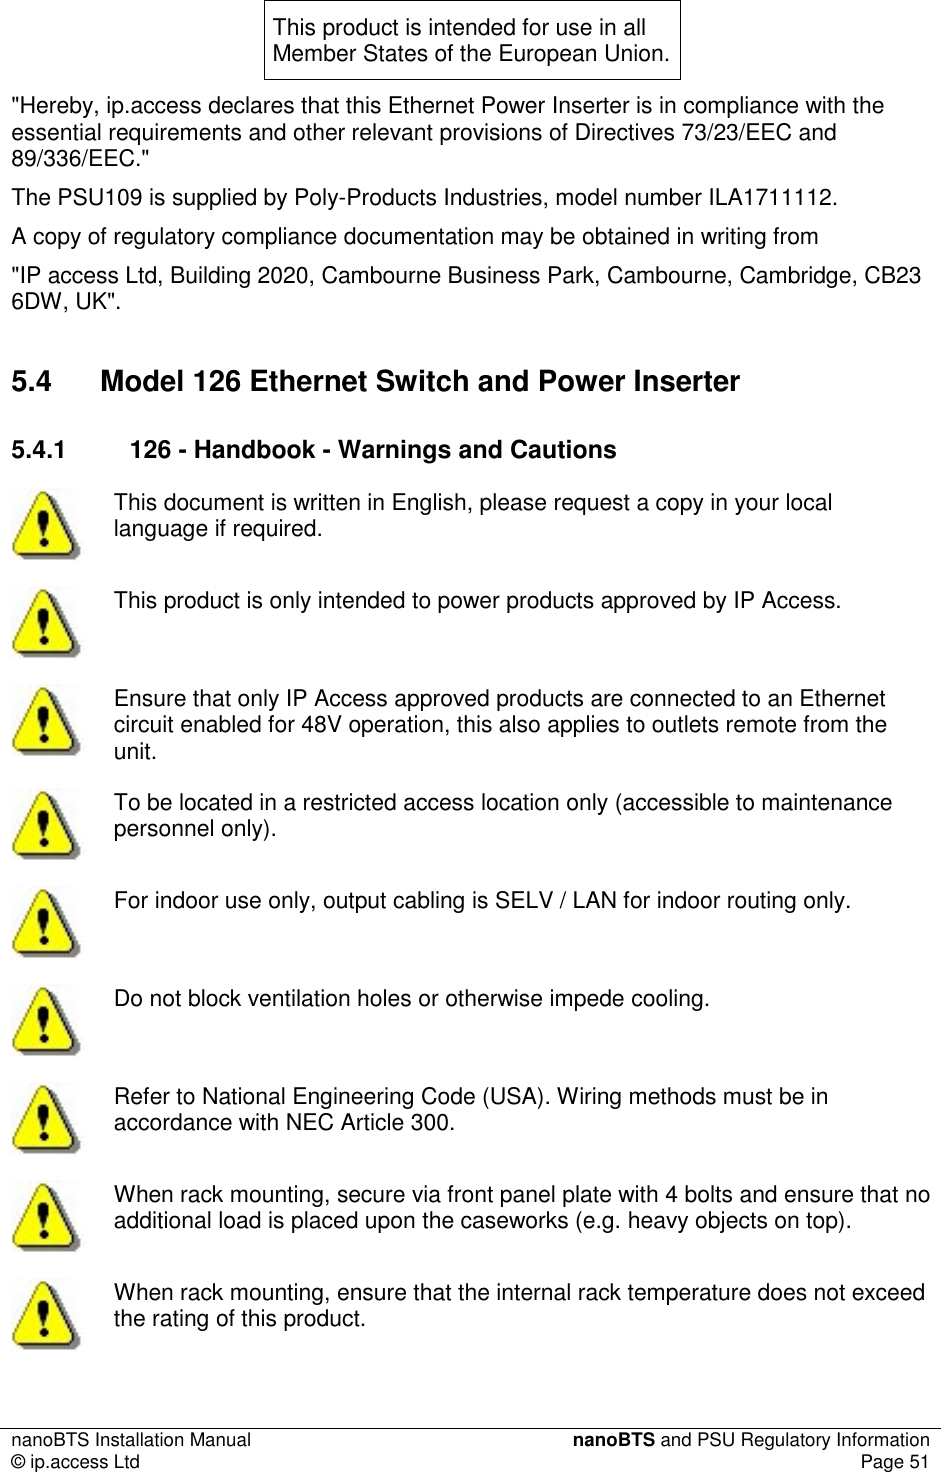 nanoBTS Installation Manual  nanoBTS and PSU Regulatory Information © ip.access Ltd  Page 51  This product is intended for use in all Member States of the European Union. &quot;Hereby, ip.access declares that this Ethernet Power Inserter is in compliance with the essential requirements and other relevant provisions of Directives 73/23/EEC and 89/336/EEC.&quot; The PSU109 is supplied by Poly-Products Industries, model number ILA1711112. A copy of regulatory compliance documentation may be obtained in writing from &quot;IP access Ltd, Building 2020, Cambourne Business Park, Cambourne, Cambridge, CB23 6DW, UK&quot;. 5.4  Model 126 Ethernet Switch and Power Inserter 5.4.1  126 - Handbook - Warnings and Cautions  This document is written in English, please request a copy in your local language if required.  This product is only intended to power products approved by IP Access.  Ensure that only IP Access approved products are connected to an Ethernet circuit enabled for 48V operation, this also applies to outlets remote from the unit.  To be located in a restricted access location only (accessible to maintenance personnel only).  For indoor use only, output cabling is SELV / LAN for indoor routing only.  Do not block ventilation holes or otherwise impede cooling.  Refer to National Engineering Code (USA). Wiring methods must be in accordance with NEC Article 300.  When rack mounting, secure via front panel plate with 4 bolts and ensure that no additional load is placed upon the caseworks (e.g. heavy objects on top).  When rack mounting, ensure that the internal rack temperature does not exceed the rating of this product. 